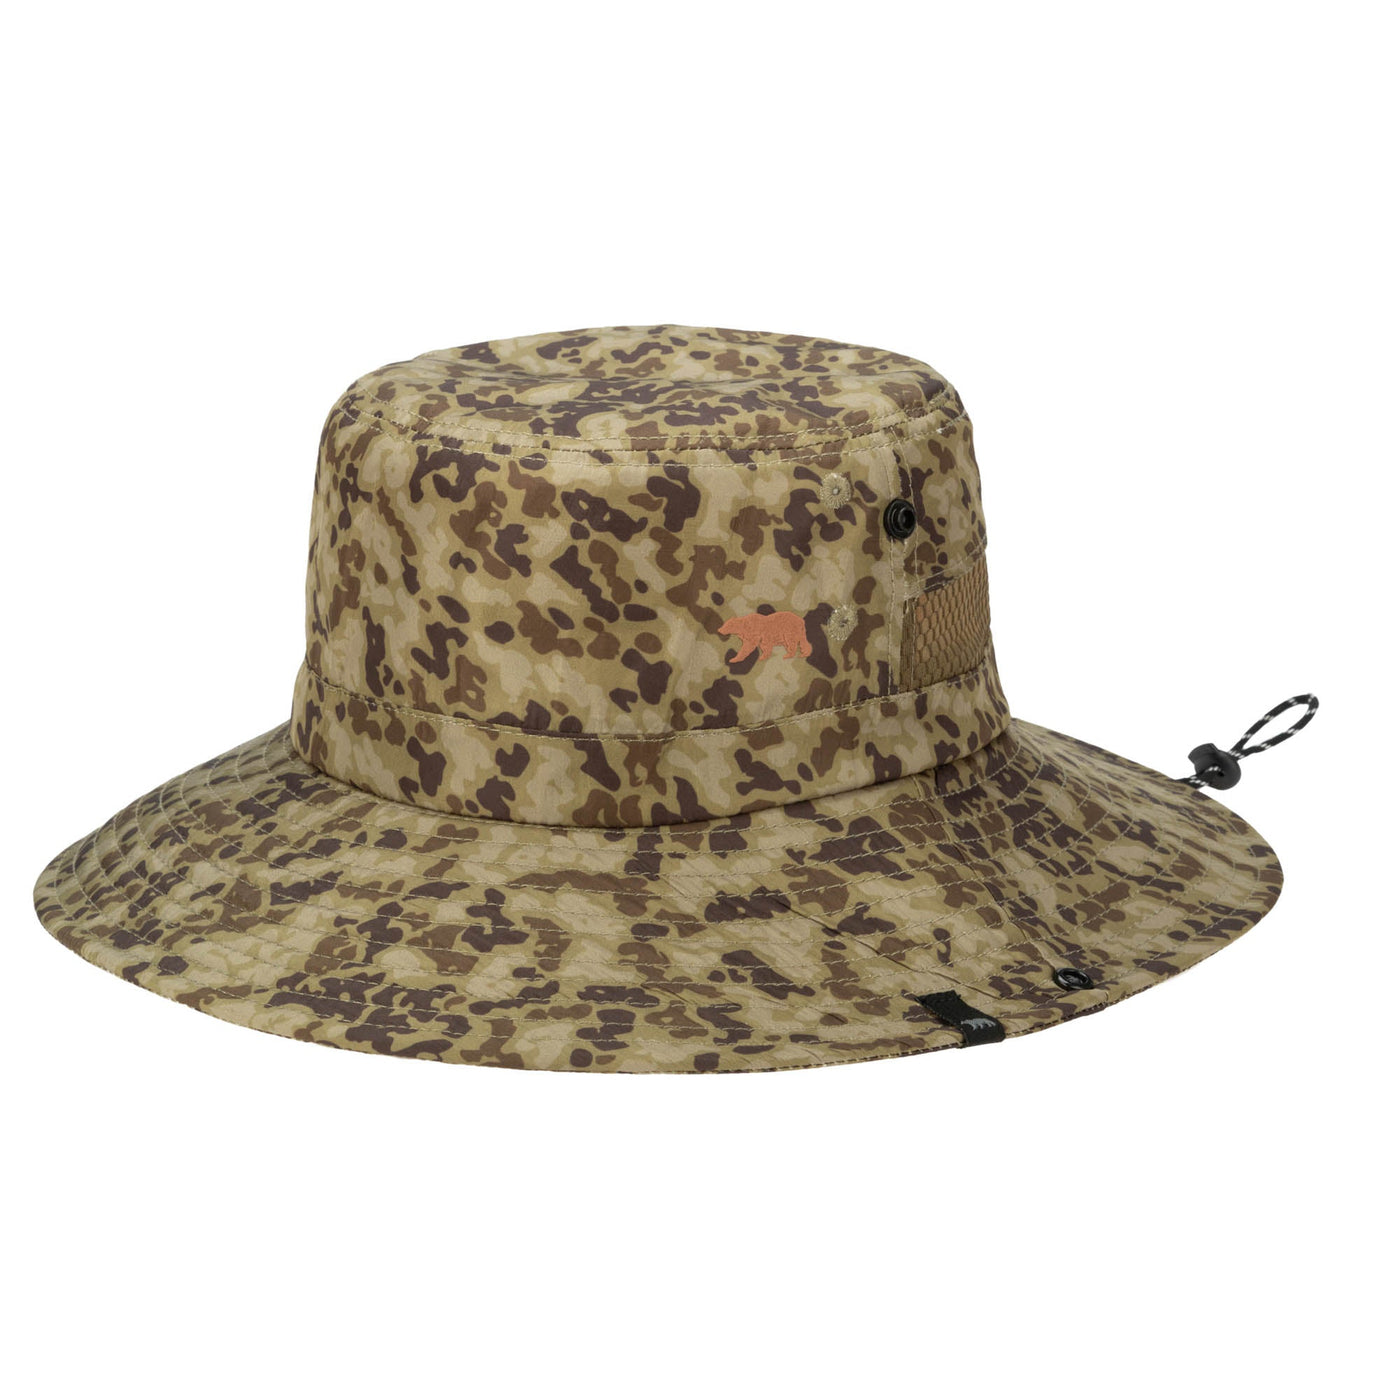 SDHC Outdoor Boonie Hat with Neck Flap and Adjustable Chin Cord Camo